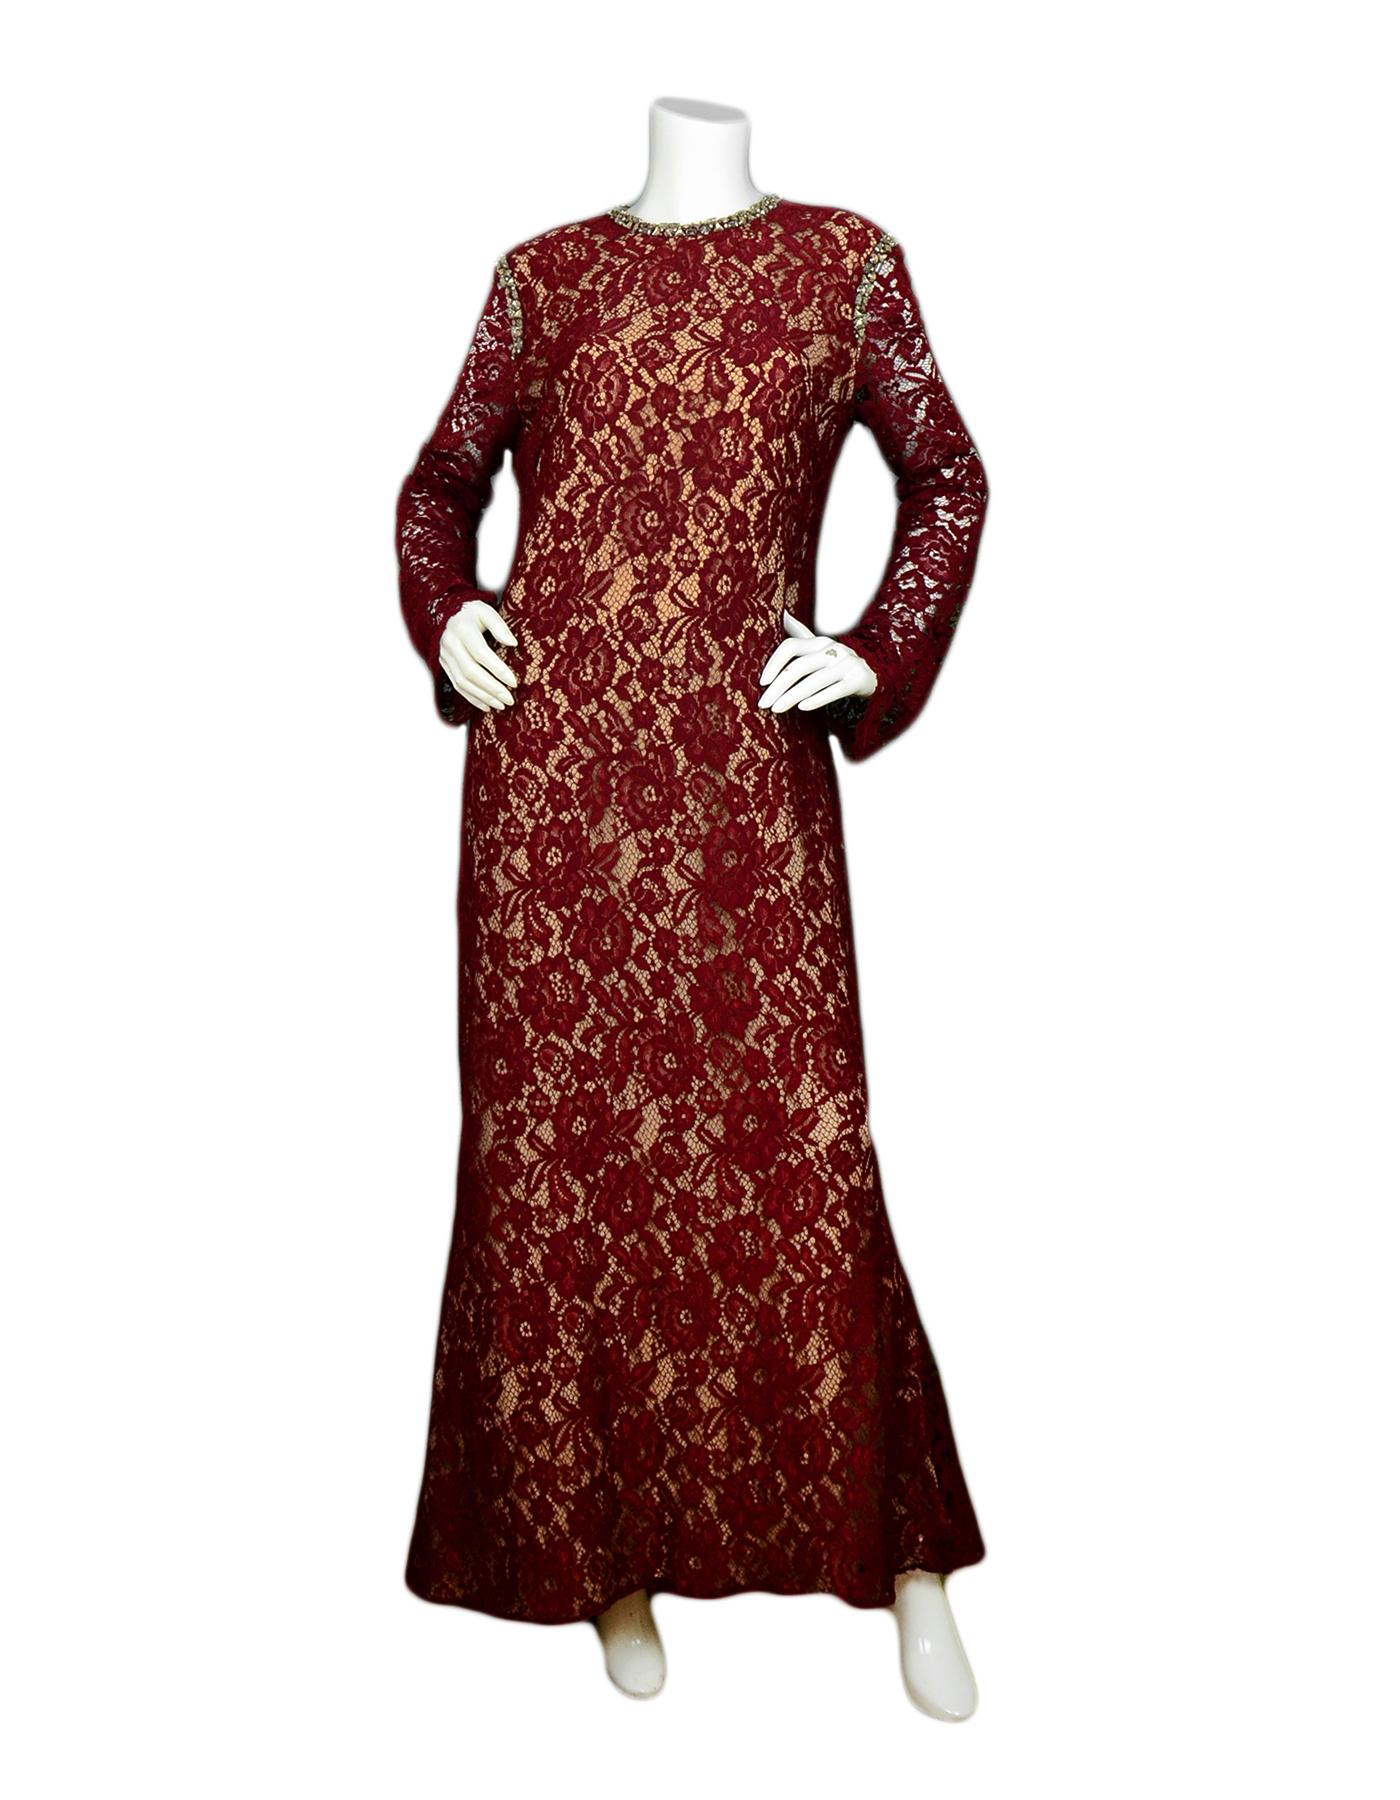 Reem Acra 2019 Burgundy Fall Lace Longsleeve Gown w/ Rhinestone Neck and Shoulder sz 16

Made In: USA
Year of Production: 2019
Color: Burgundy
Materials: Cotton
Lining: Cotton
Opening/Closure: Back zipper
Overall Condition: Excellent pre-owned